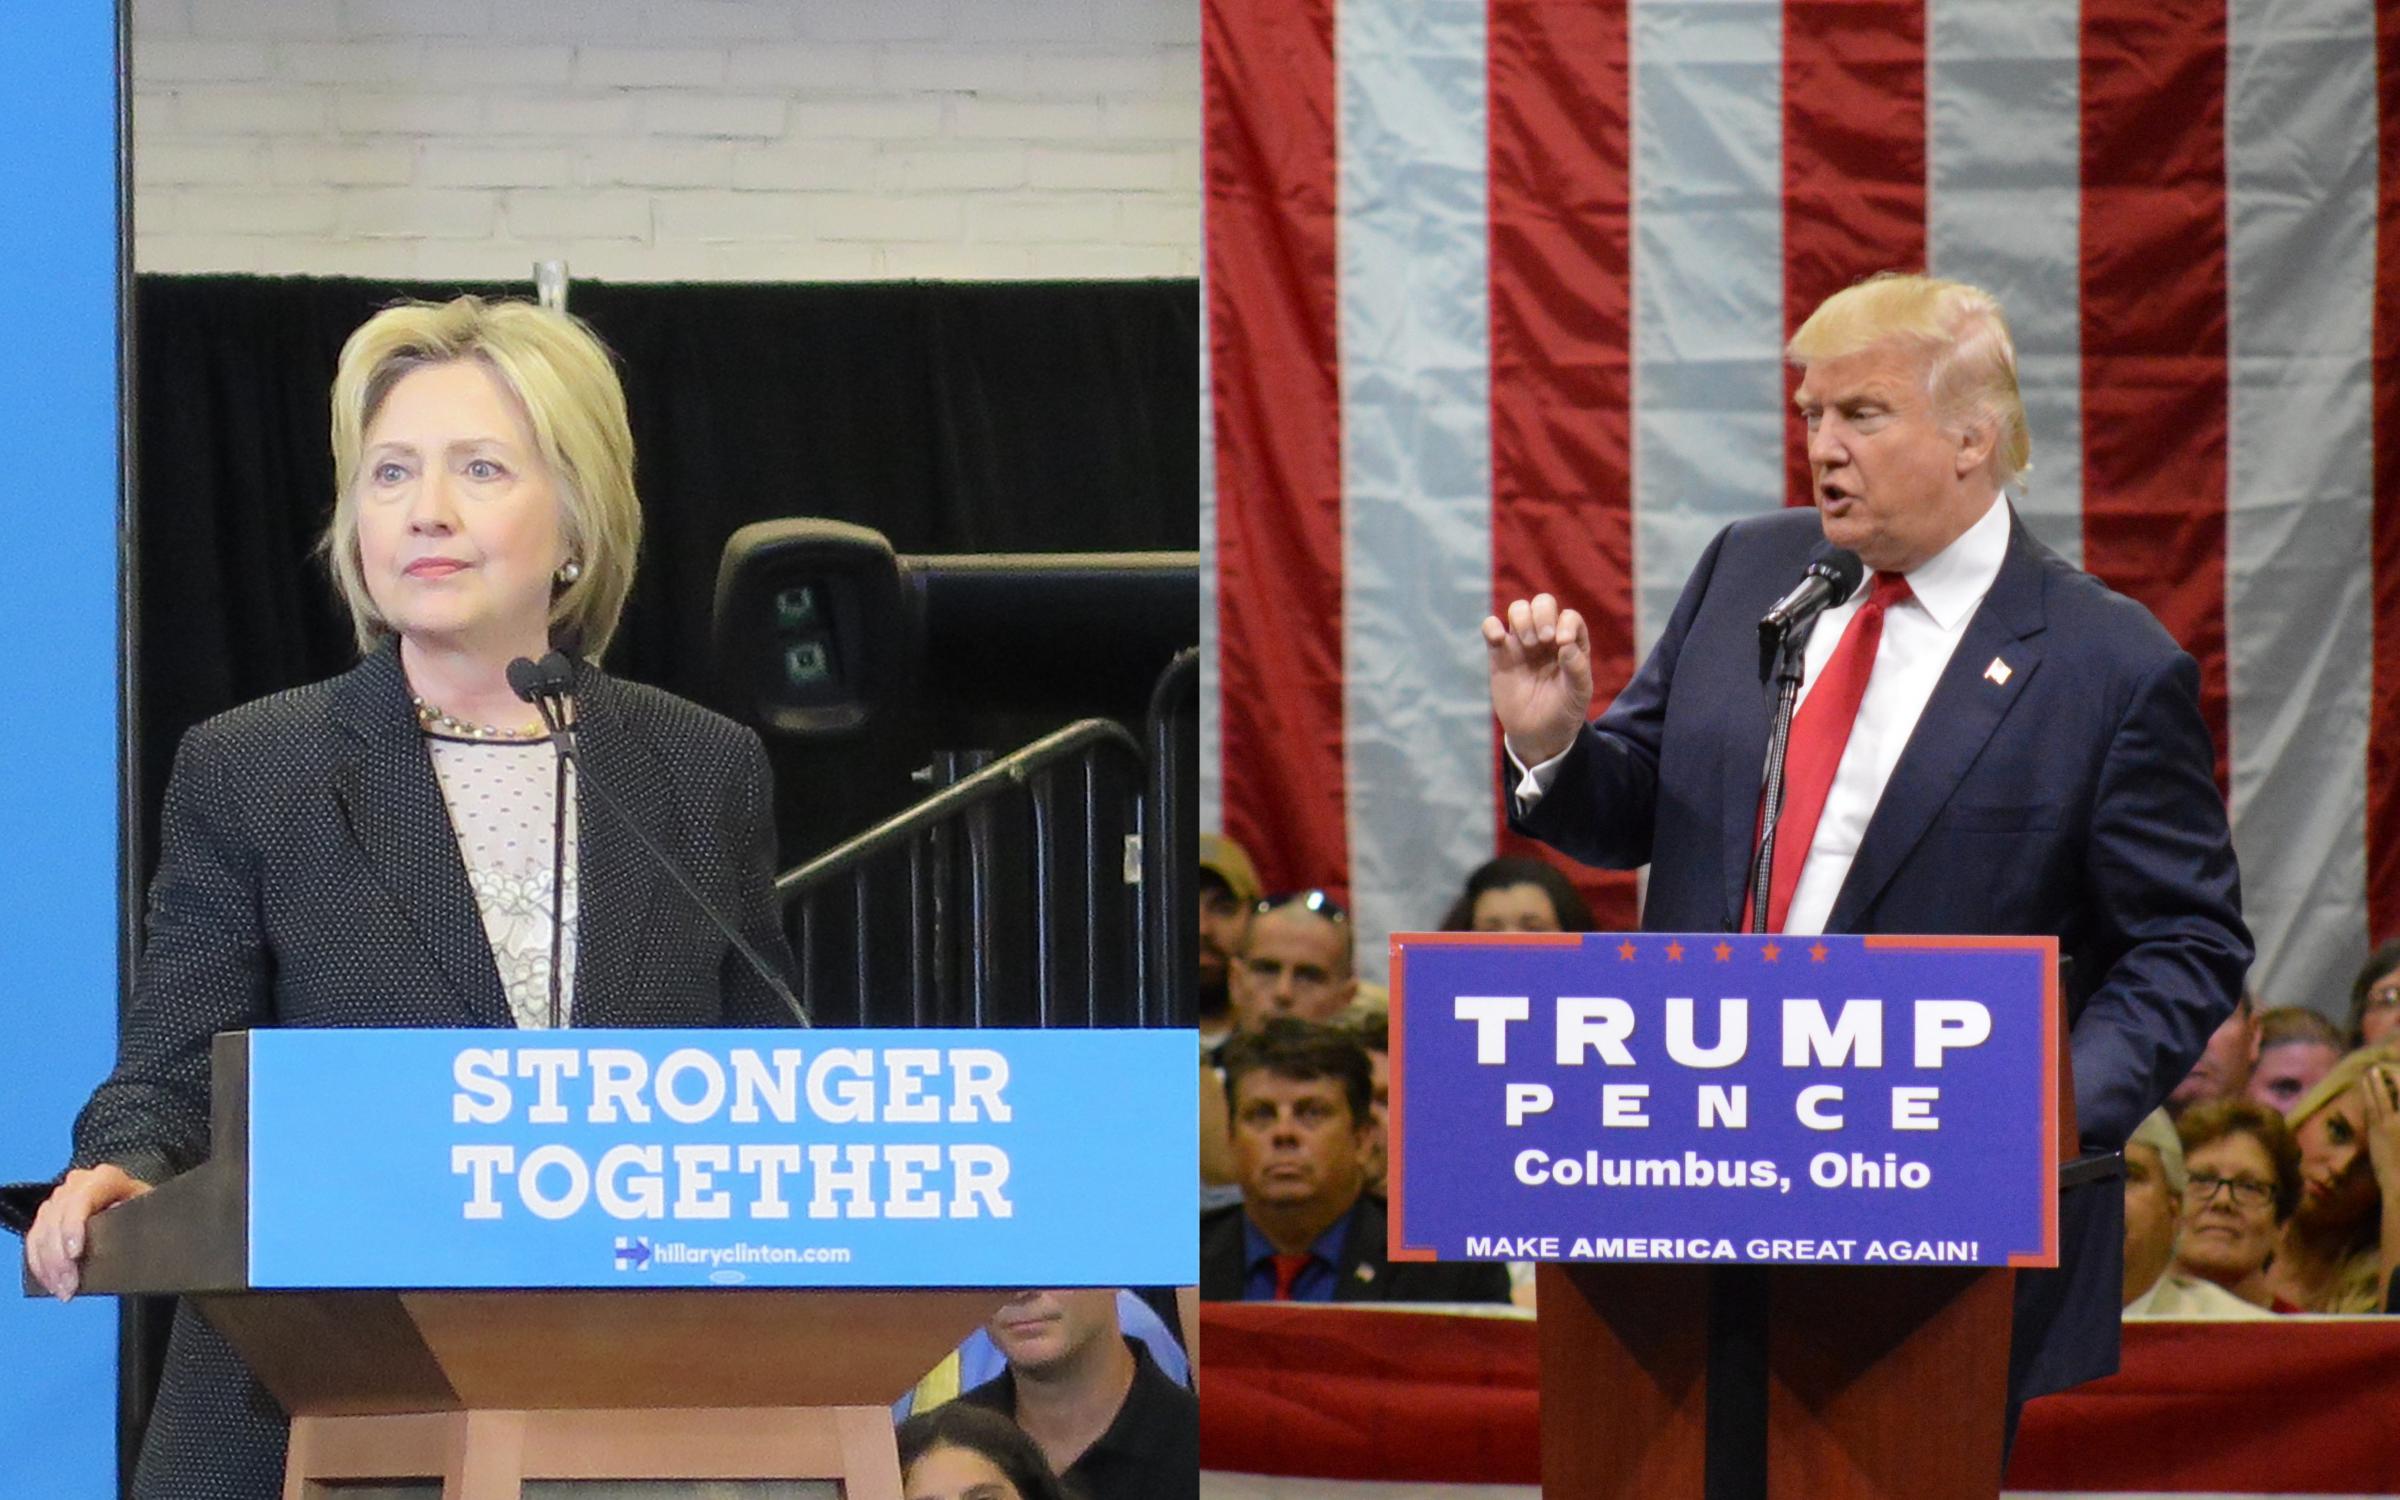 Hillary Clinton and Donald Trump pictured during campaign events in Ohio. 